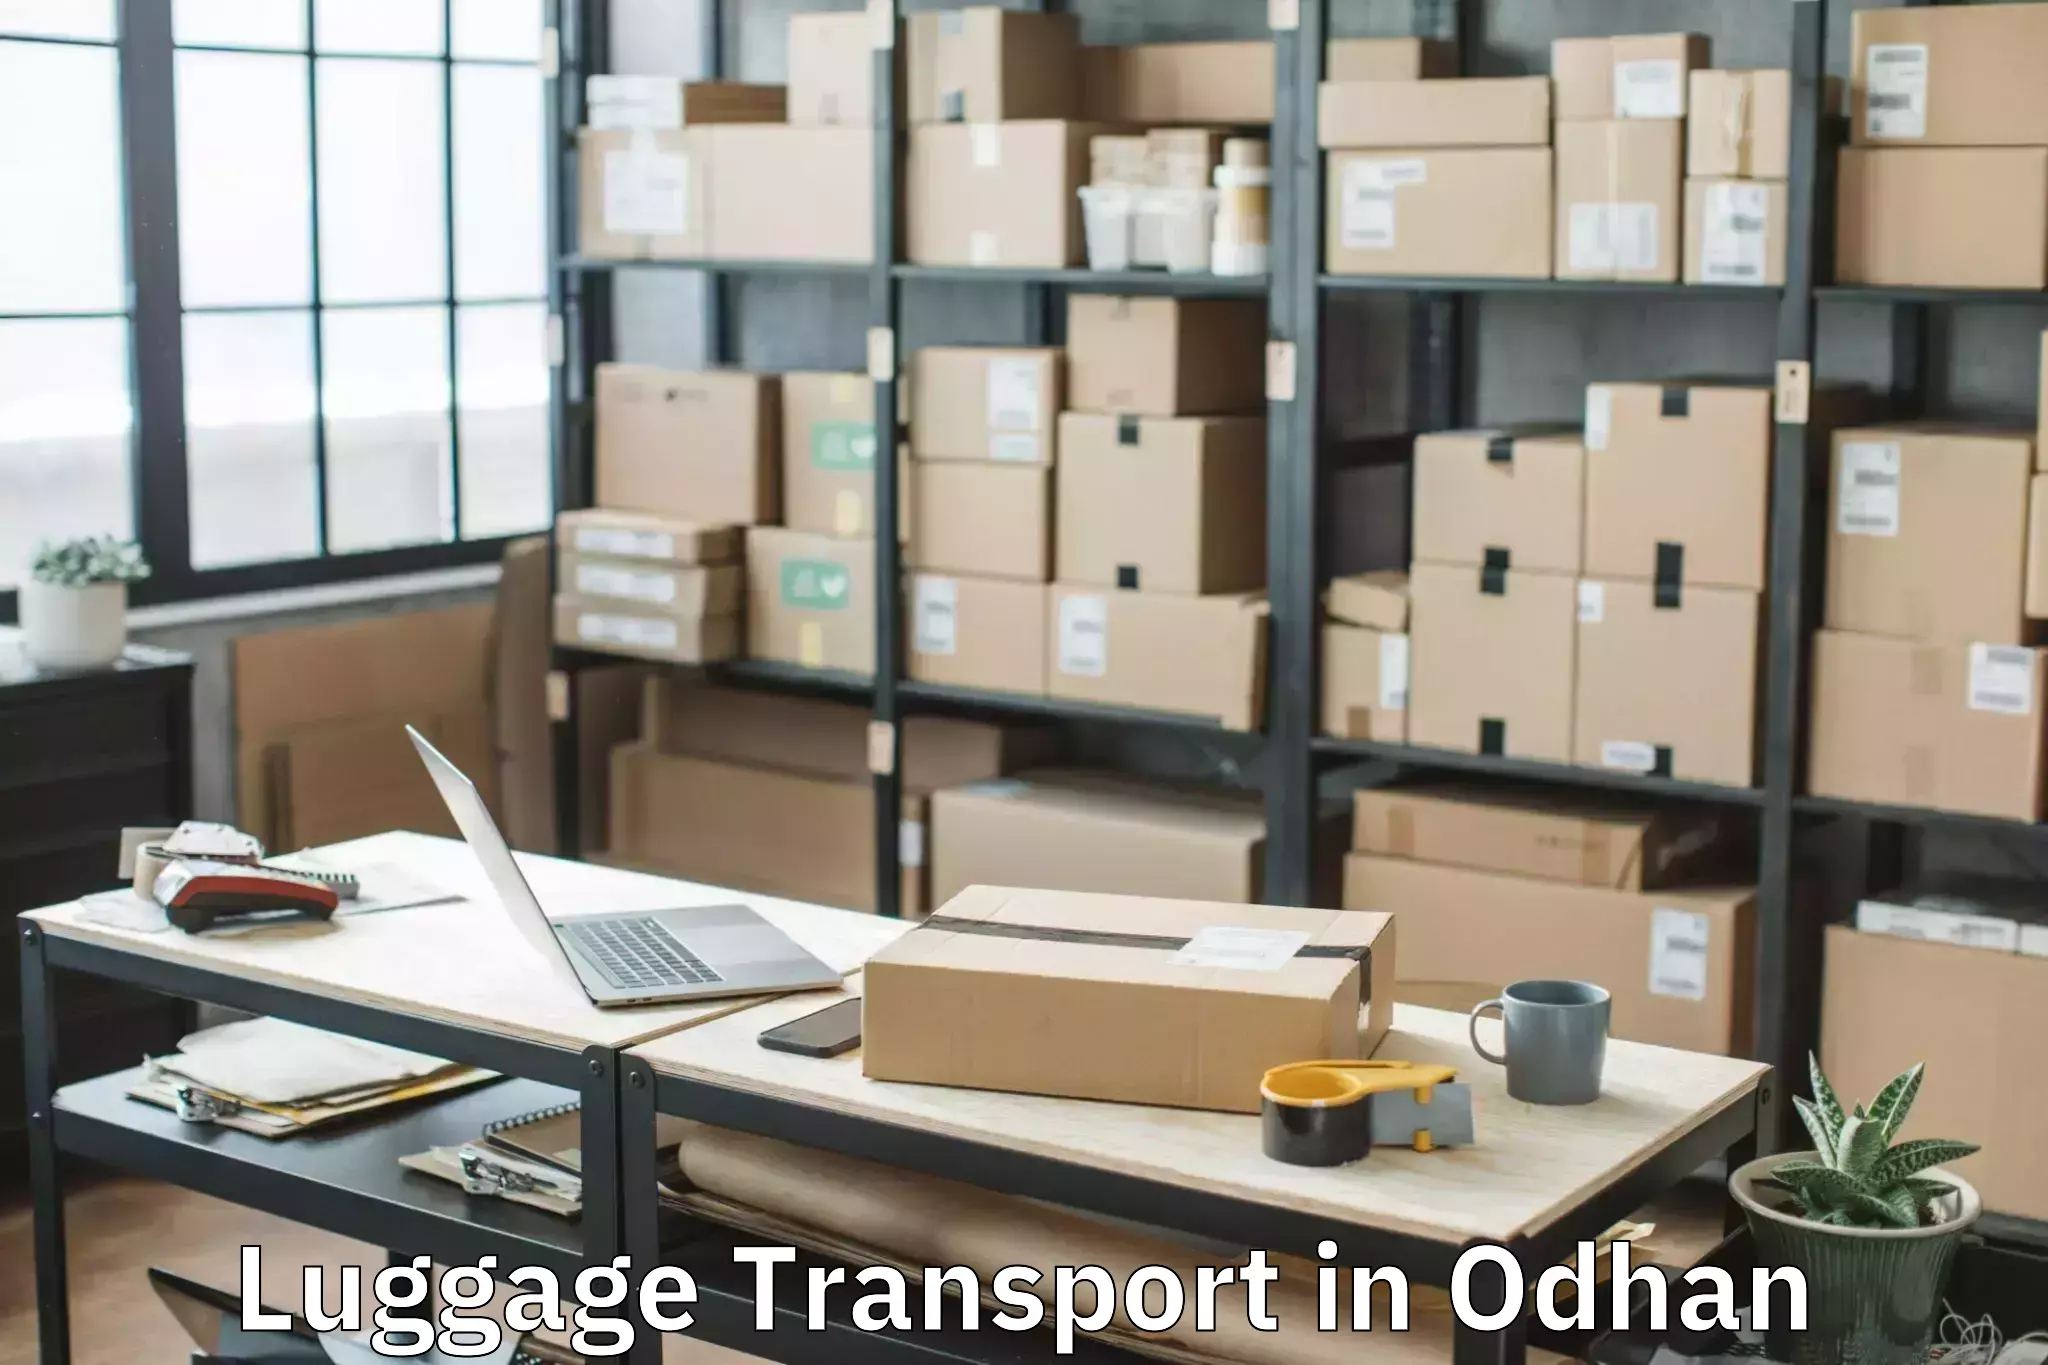 Luggage transport rates in Odhan